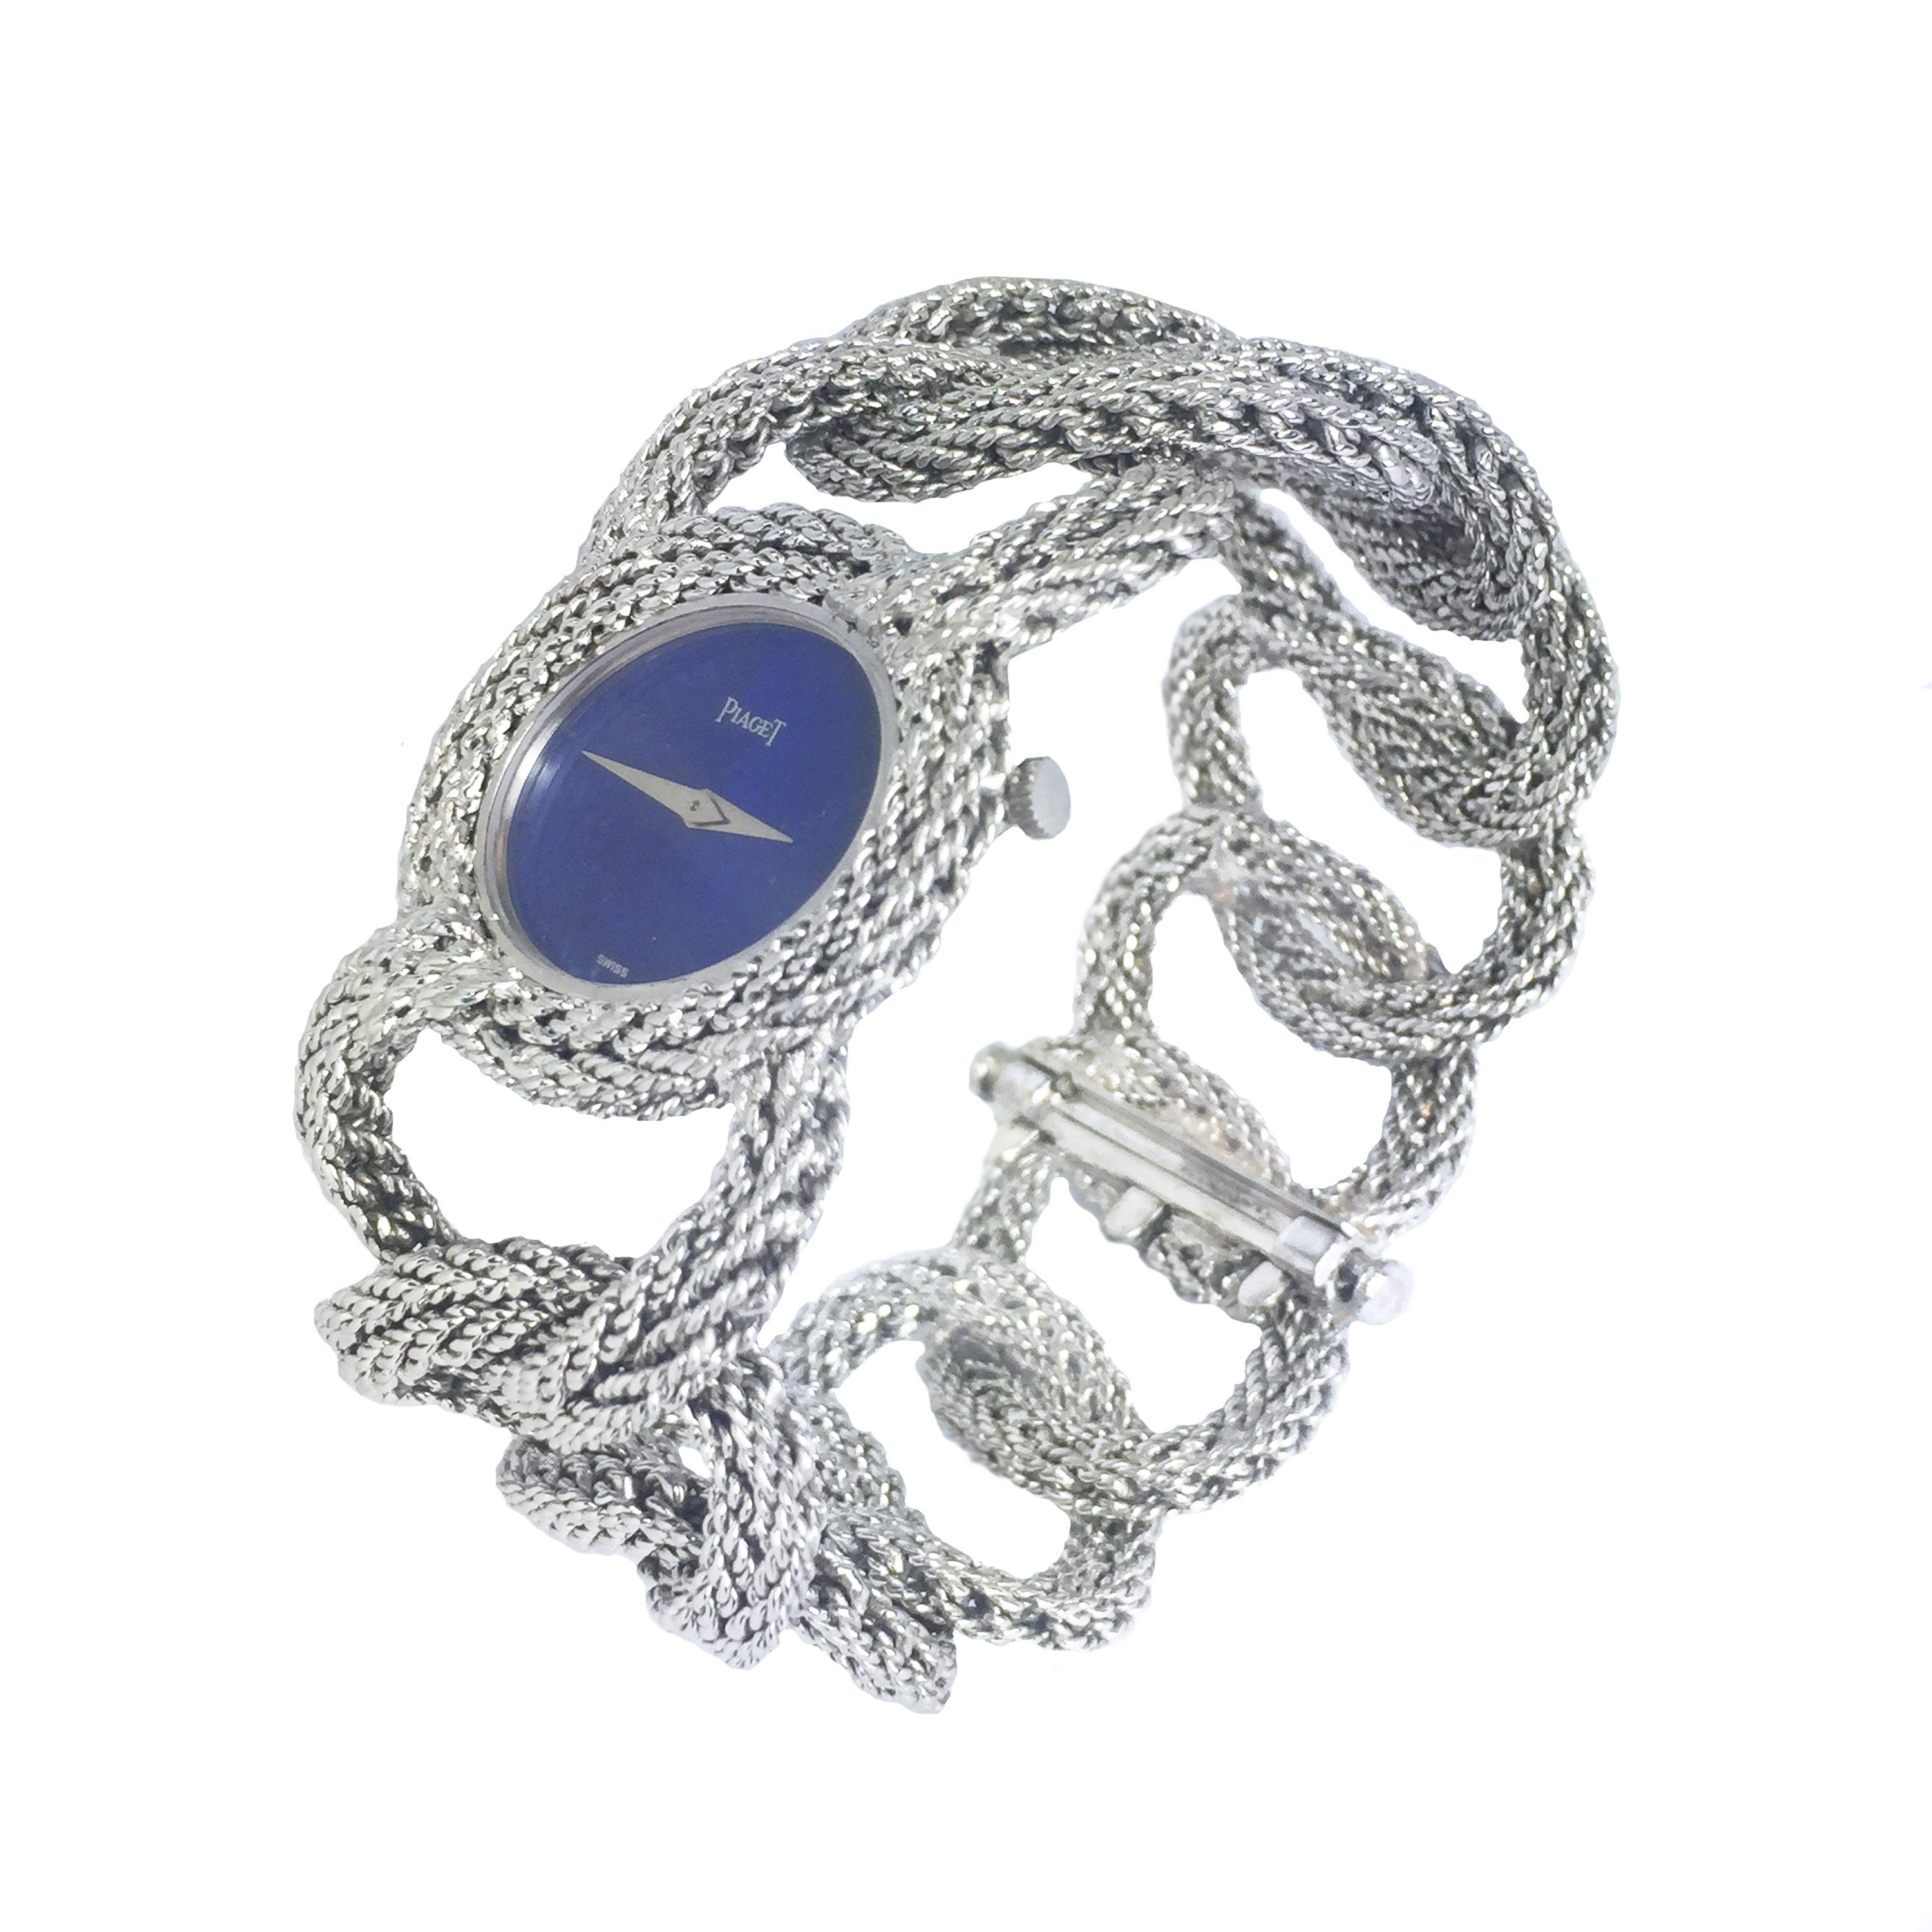 Circa 1970 Piaget 18k White Gold Bracelet Watch, measuring 7 1/2 inches in length and 1 1/4 inches wide. The hand made oval links have a soft textured finish and are very flexible.  17 jewel mechanical, manual wind movement, Lapis Lazuli Dial. 